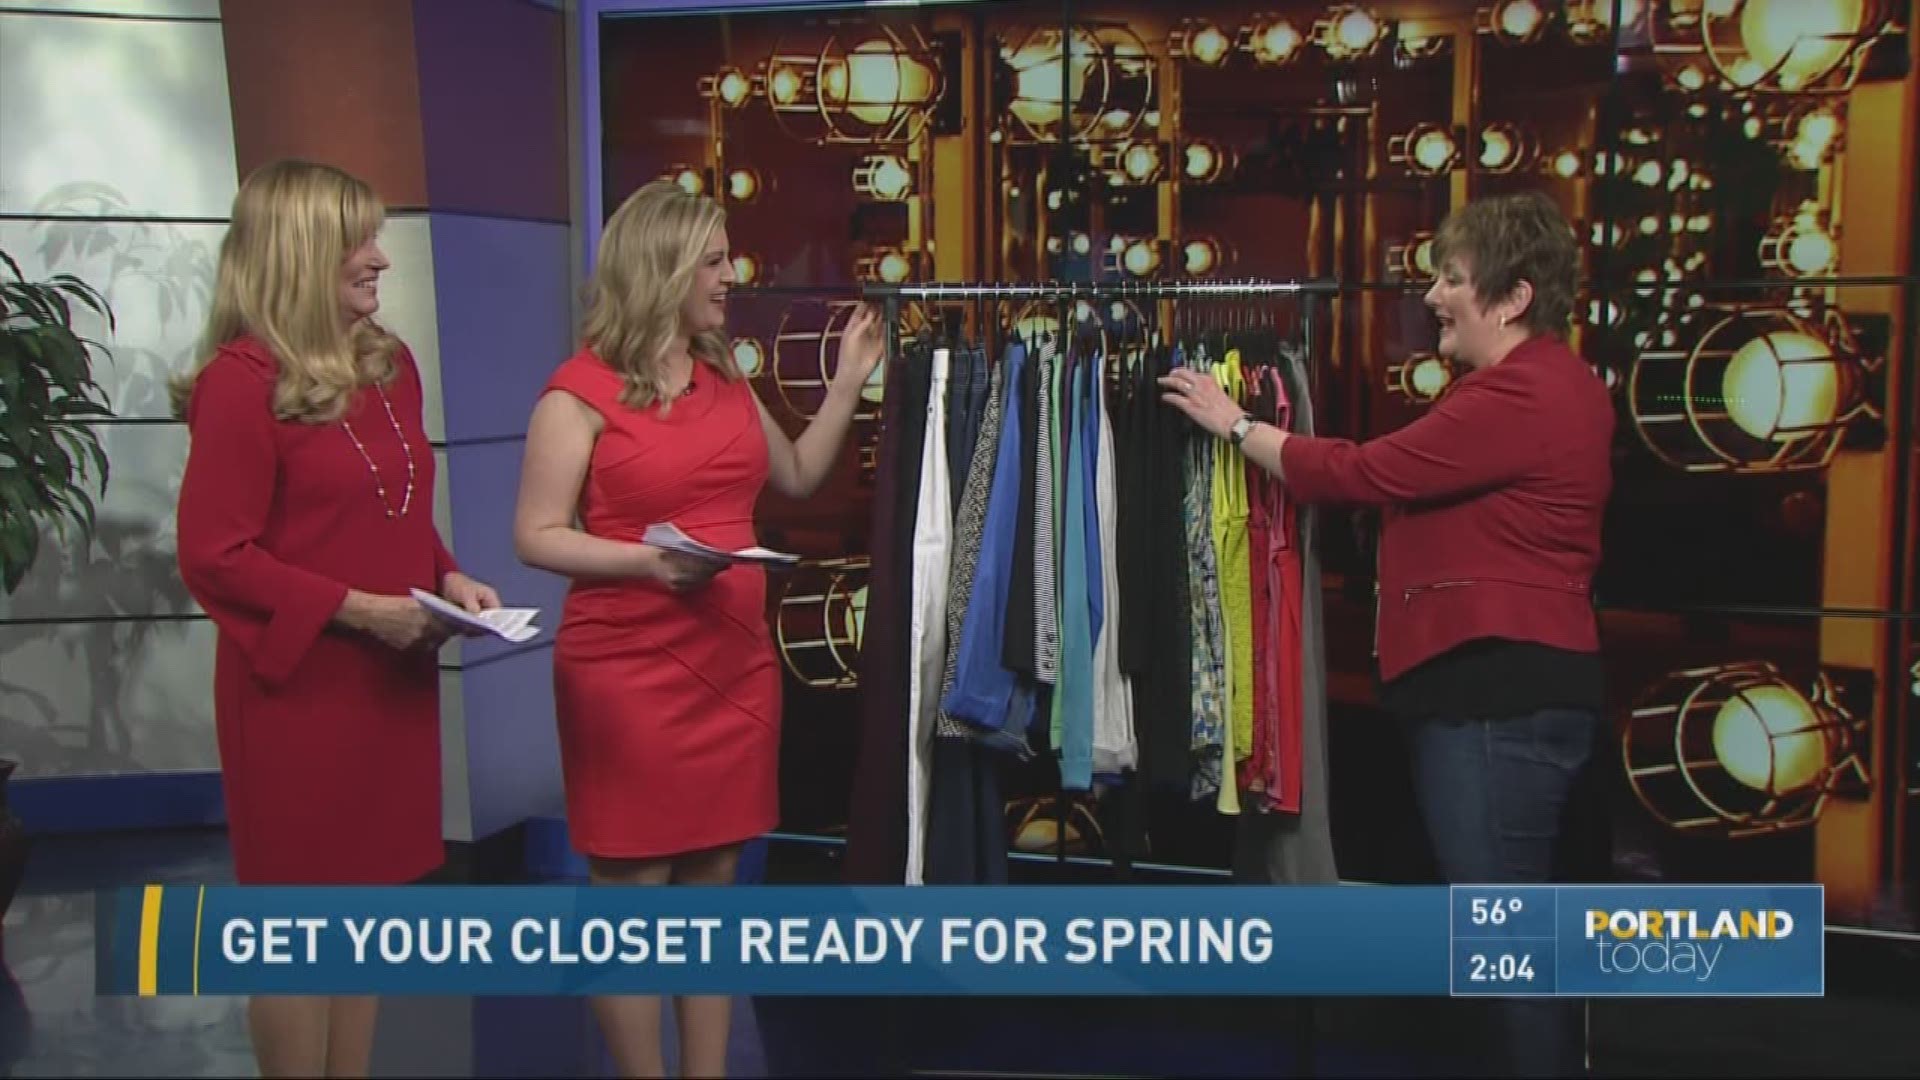 Get your closet ready for spring